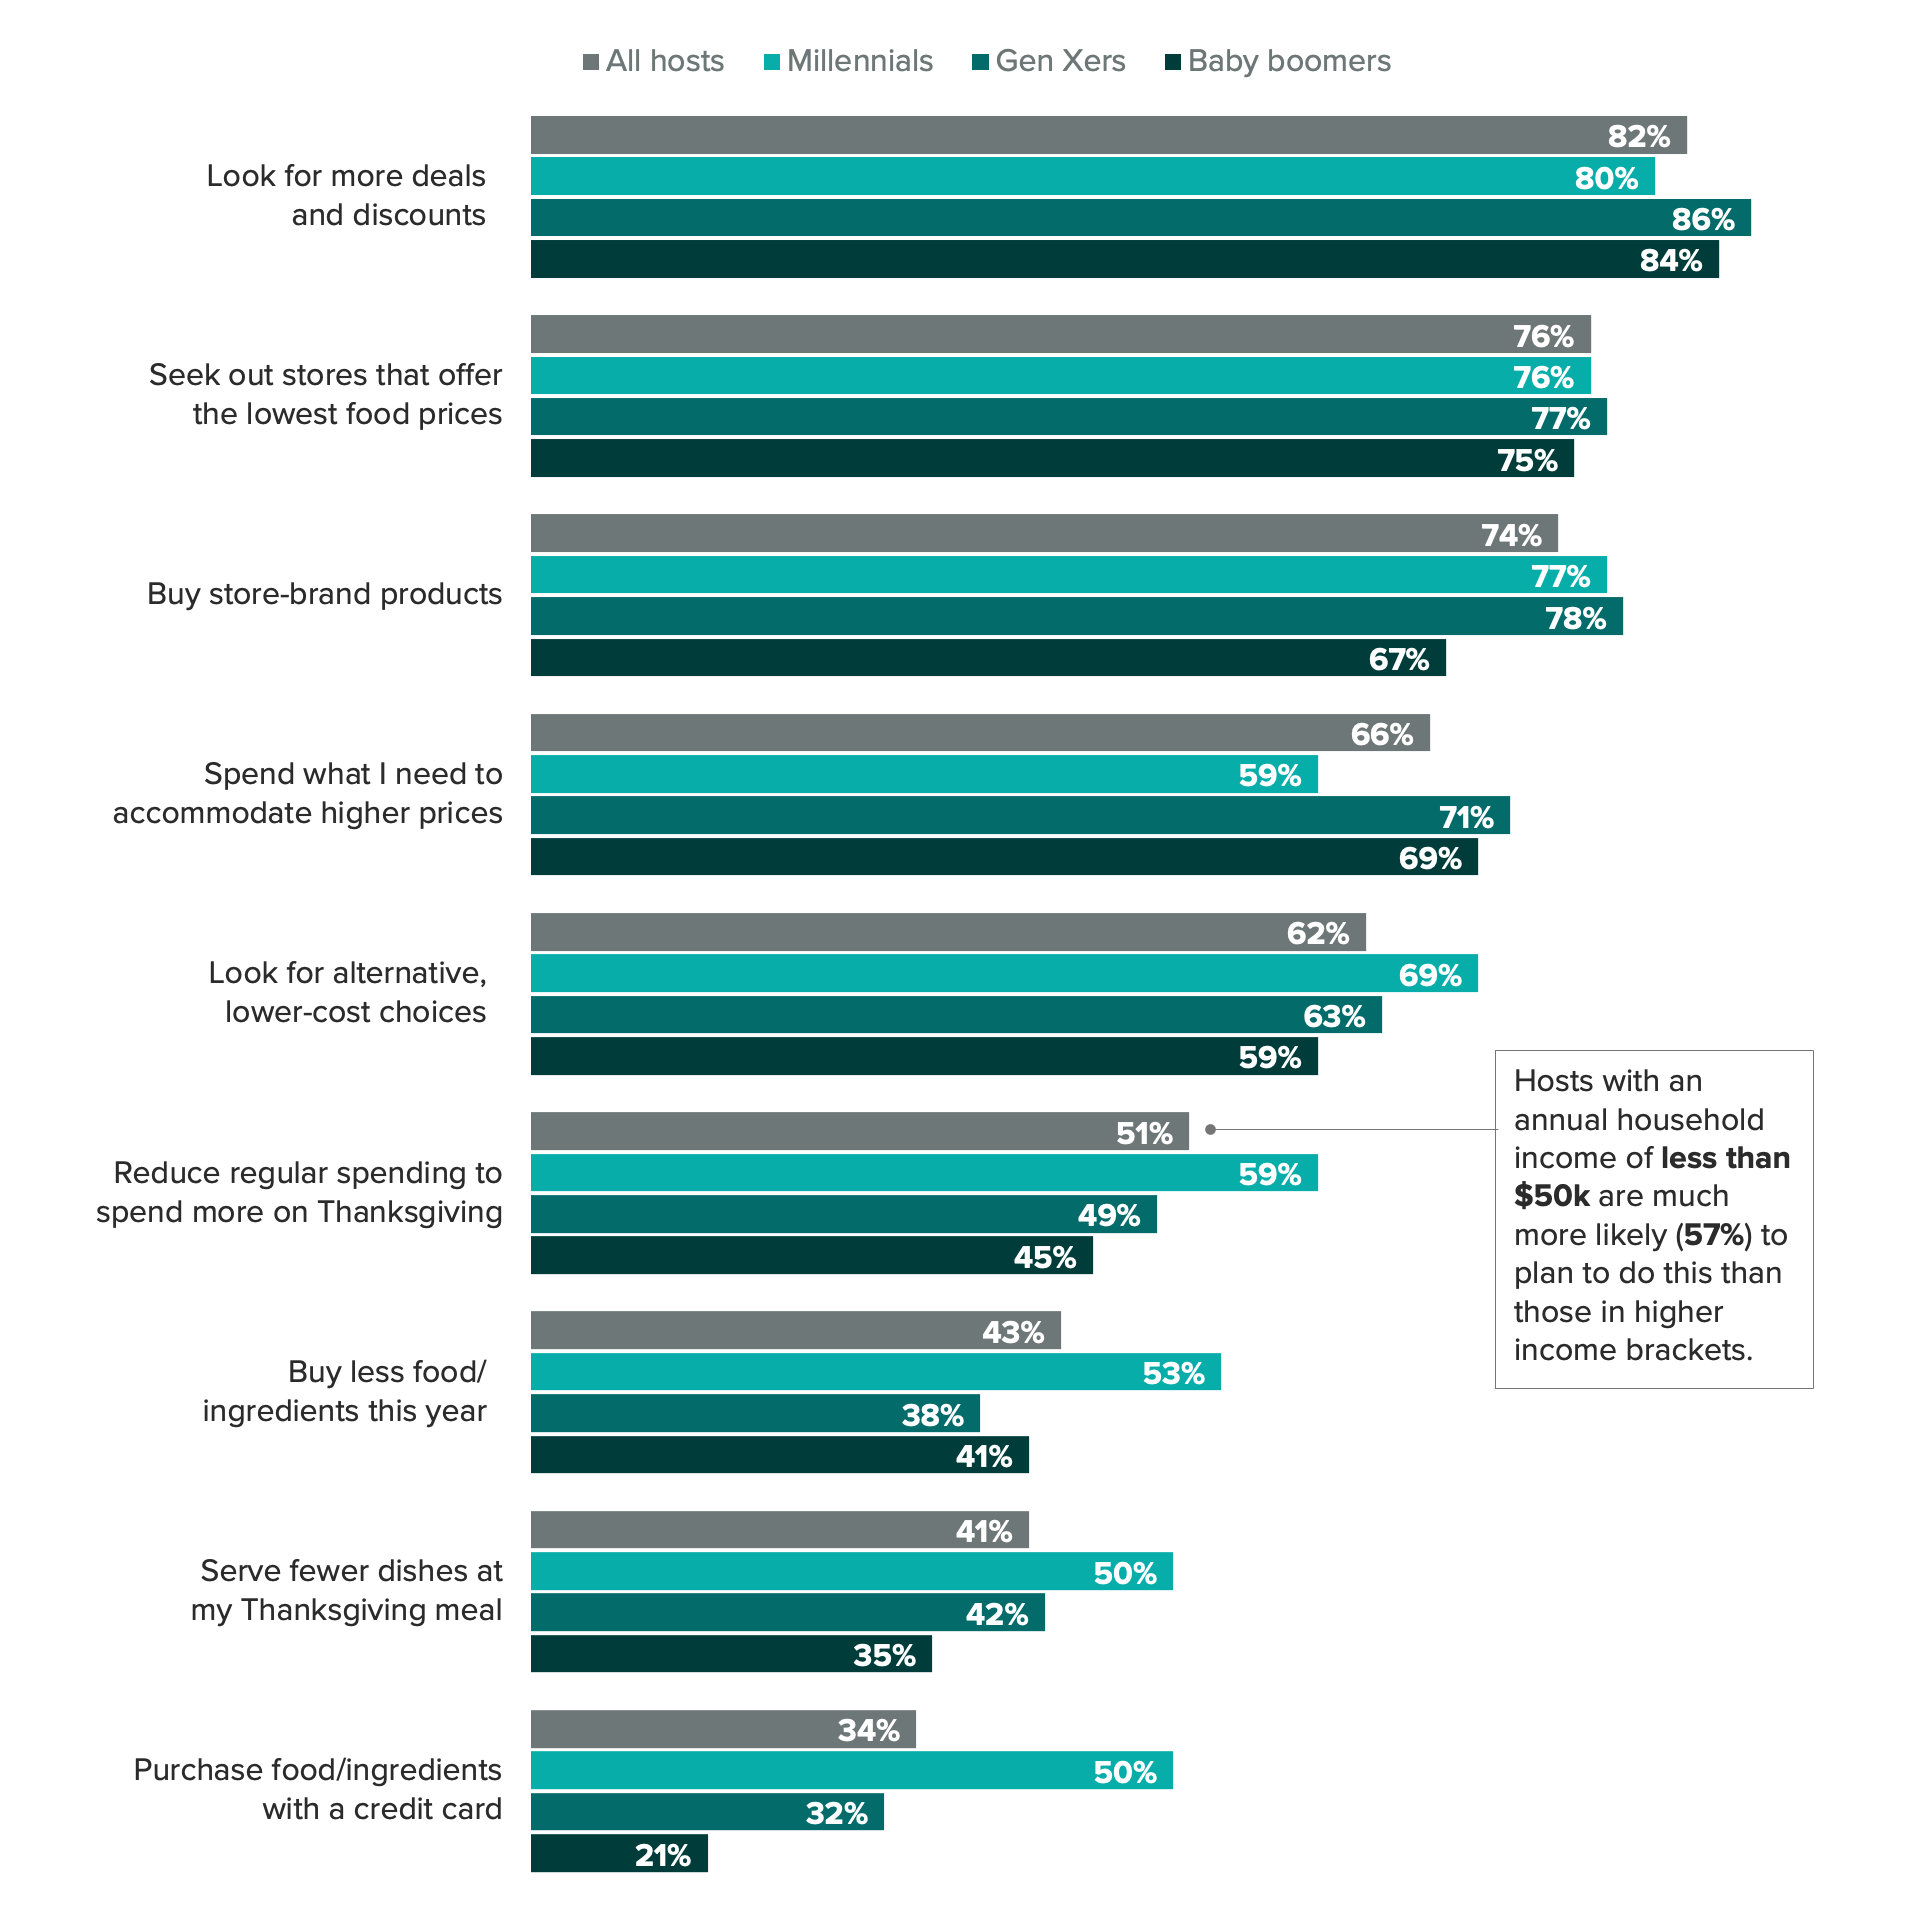 Bar chart of savings tactics that different hosts plan to use this year, showing millennial hosts are more likely than older generations to say they'll be employing a variety of savings tactics.